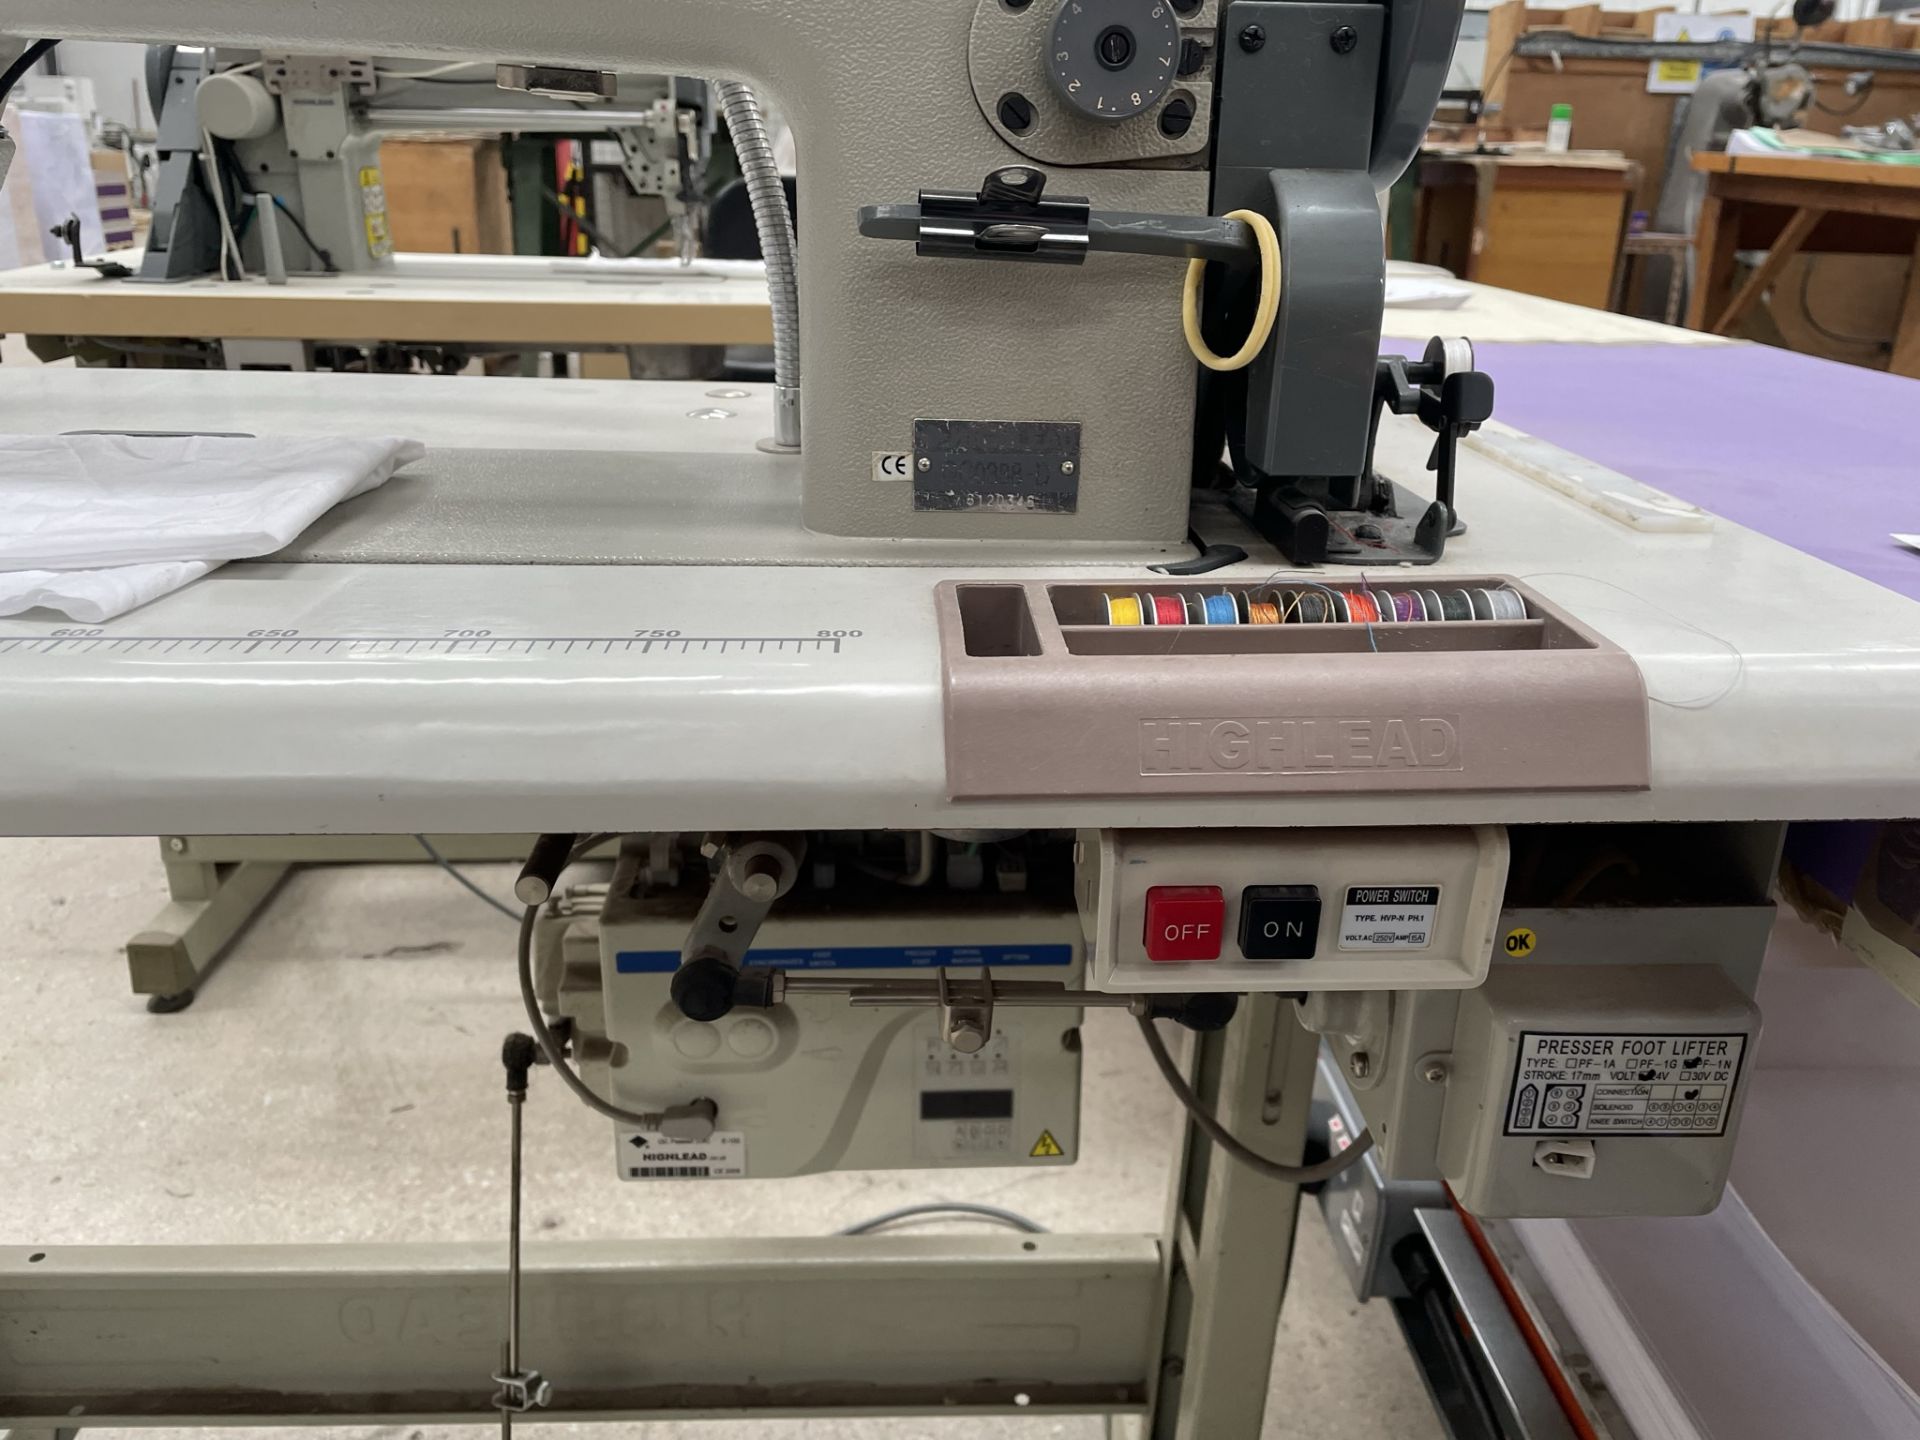 Highlead GC0388-DIndustrial Flat Bed Sewing Machine - Image 5 of 5